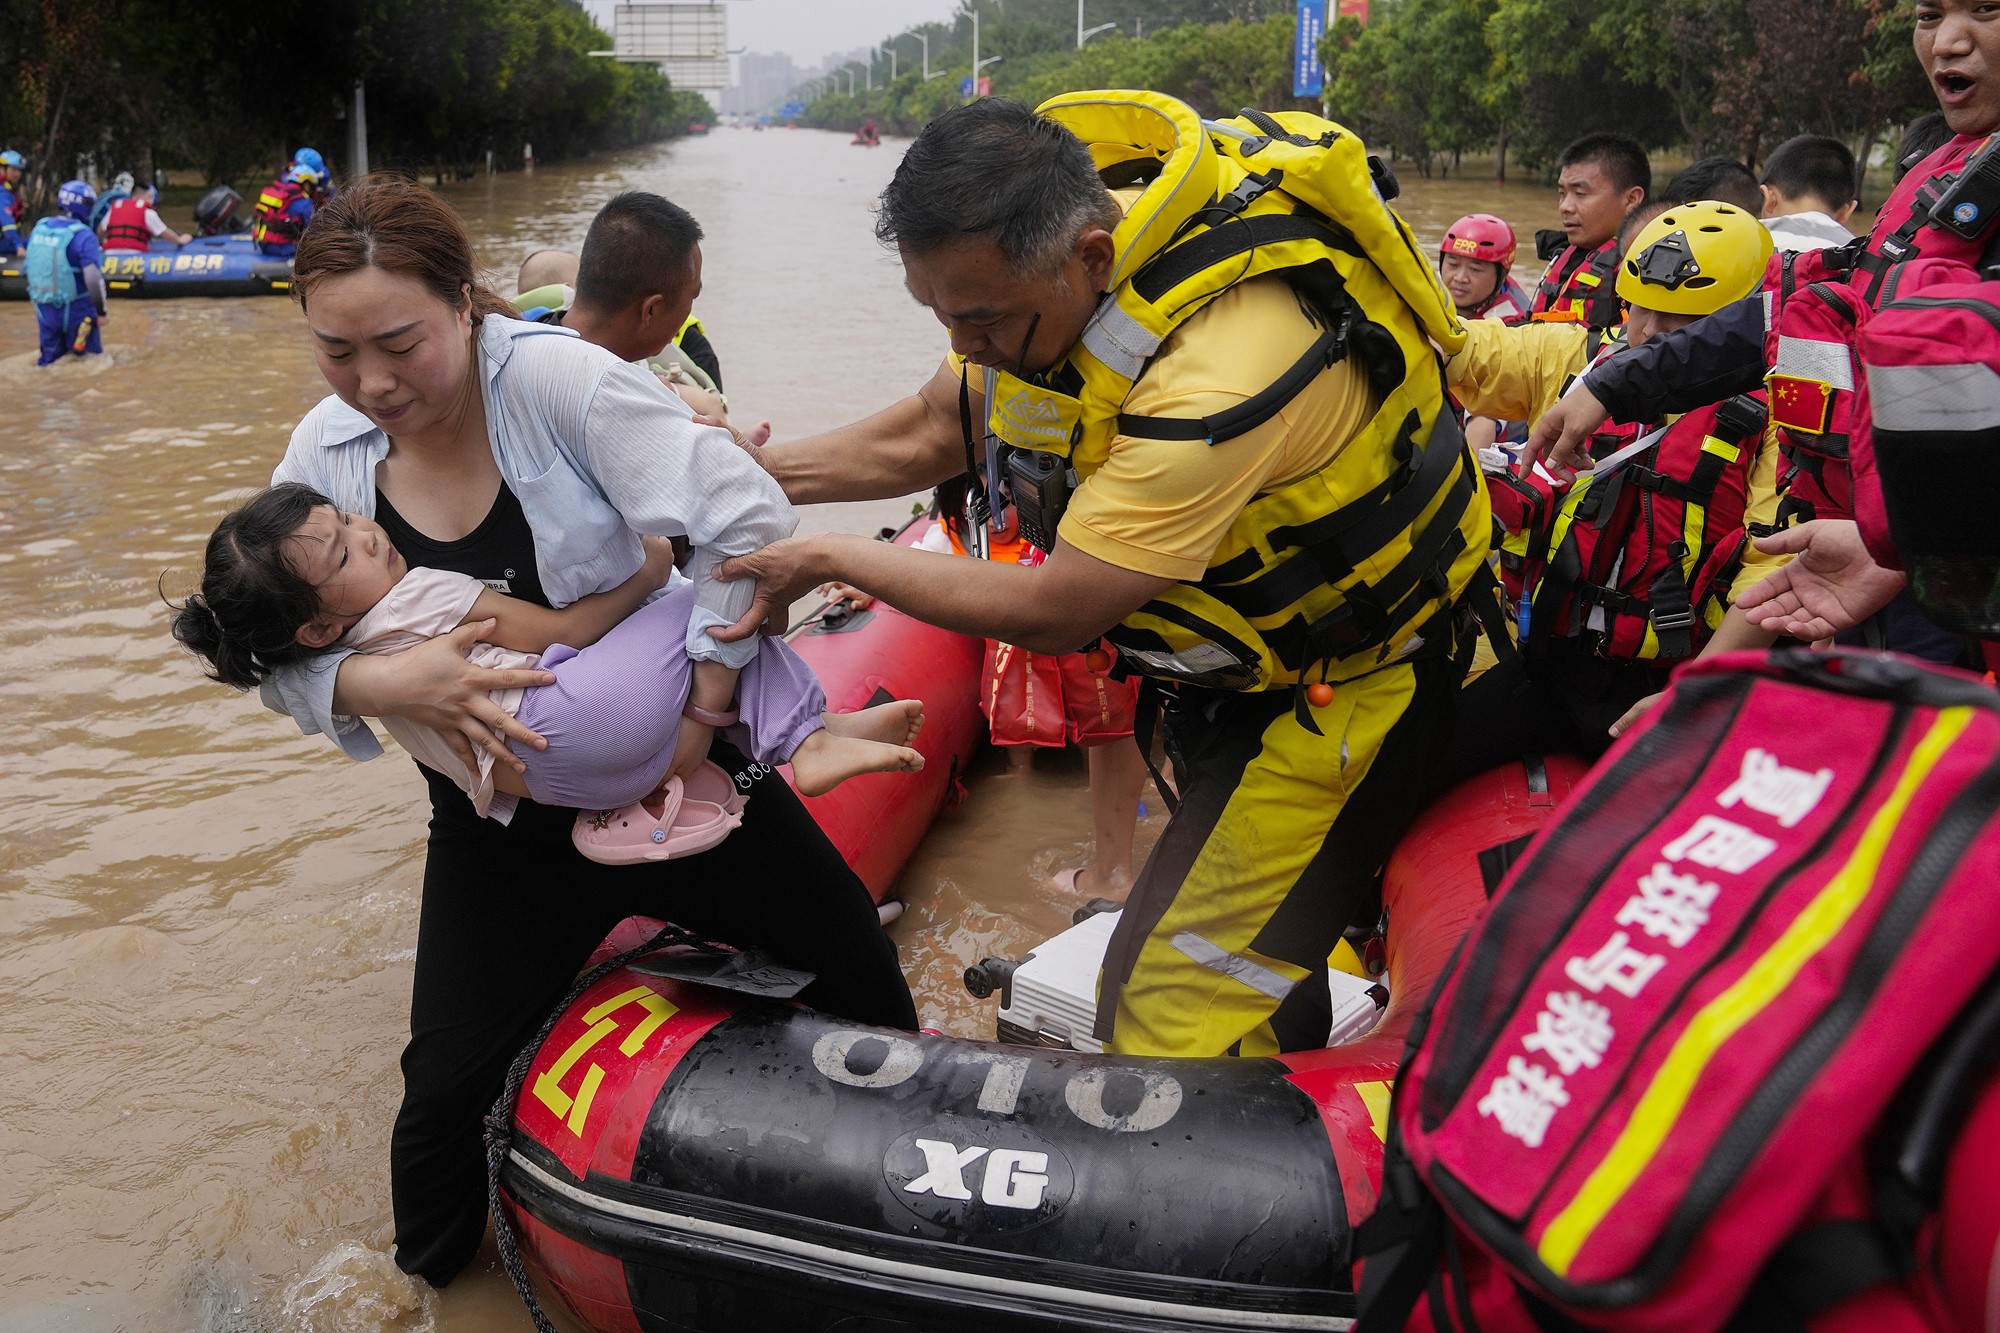 A woman holding a young girl steps out of a small rubber boat, helped by a man, in floodwaters over a road. Others in the boat behind them.